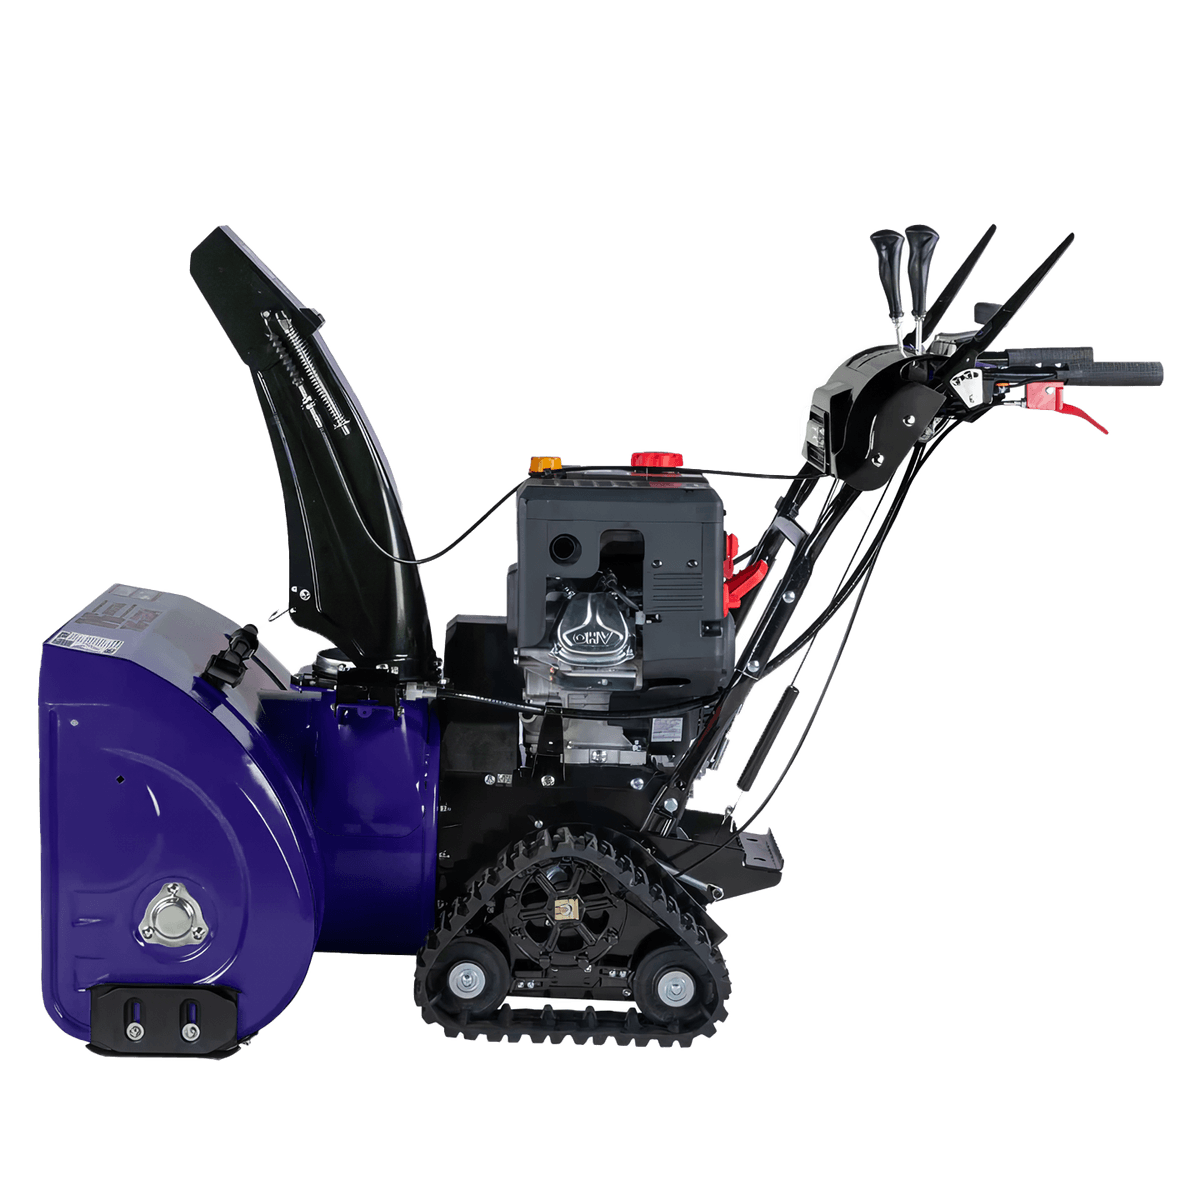 Value Industrial 34 inches Self-propelled Gas Powered Snow Thrower